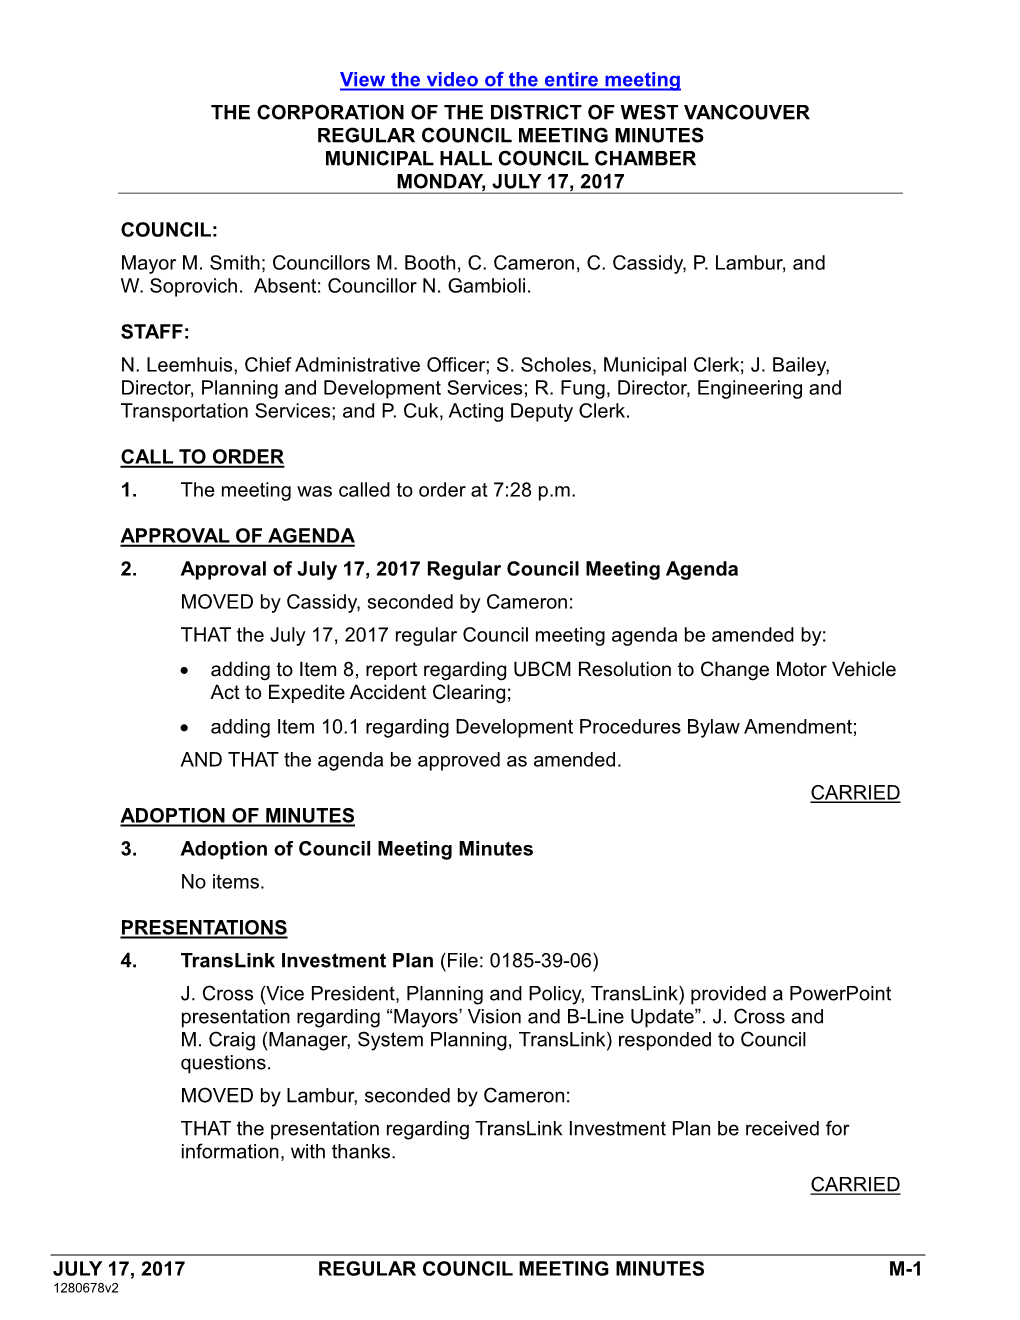 JULY 17, 2017 REGULAR COUNCIL MEETING MINUTES M-1 View The